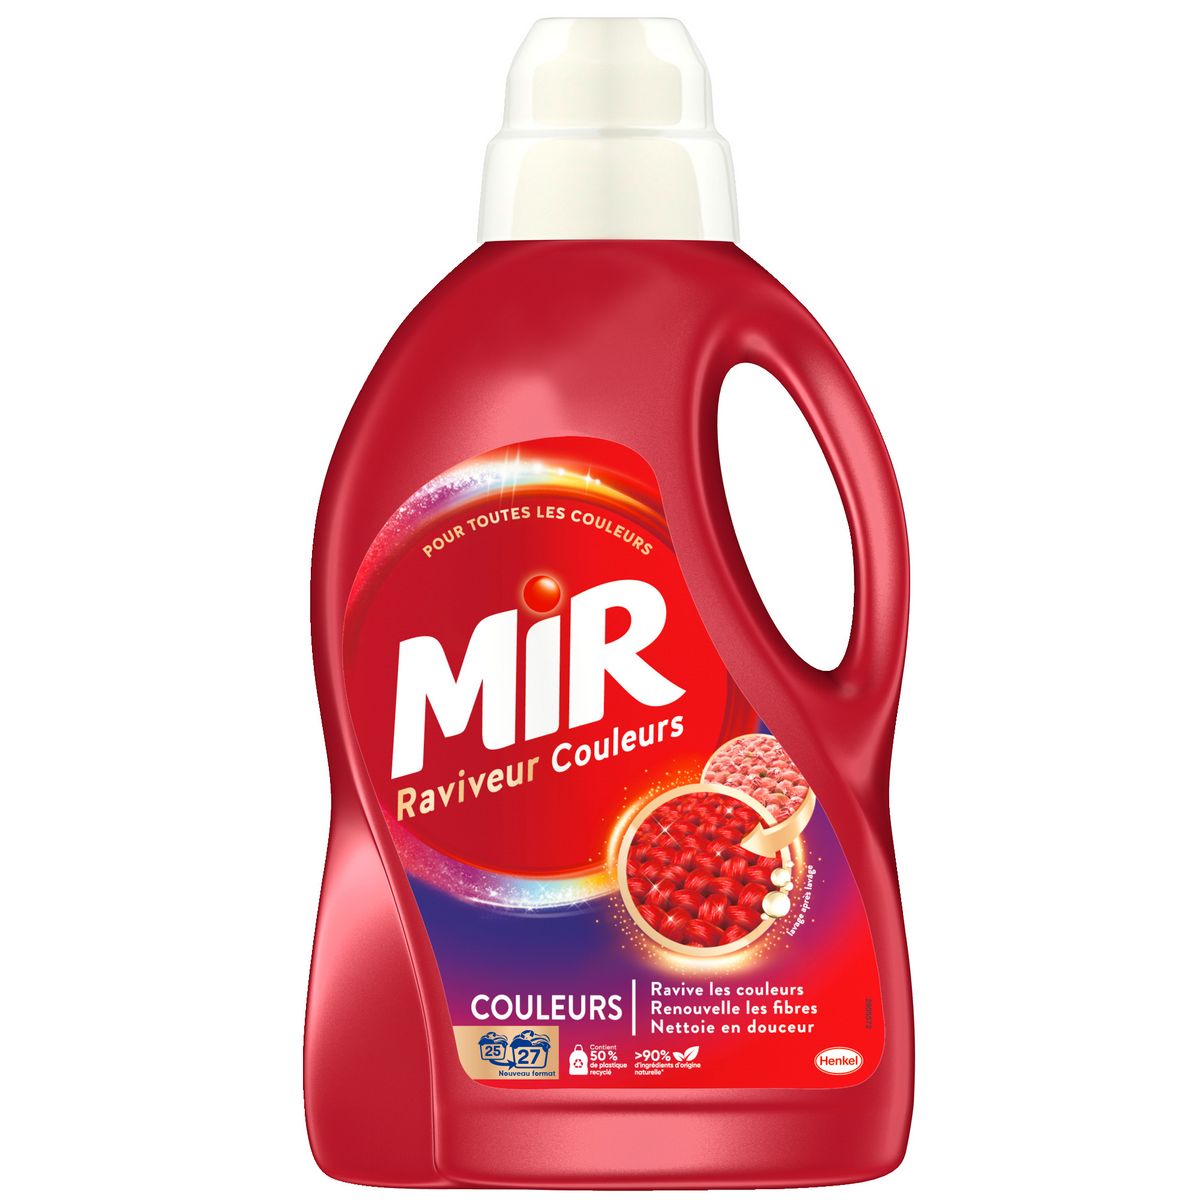 Mir Colors detergent with stain remover x27 wash 1.48L